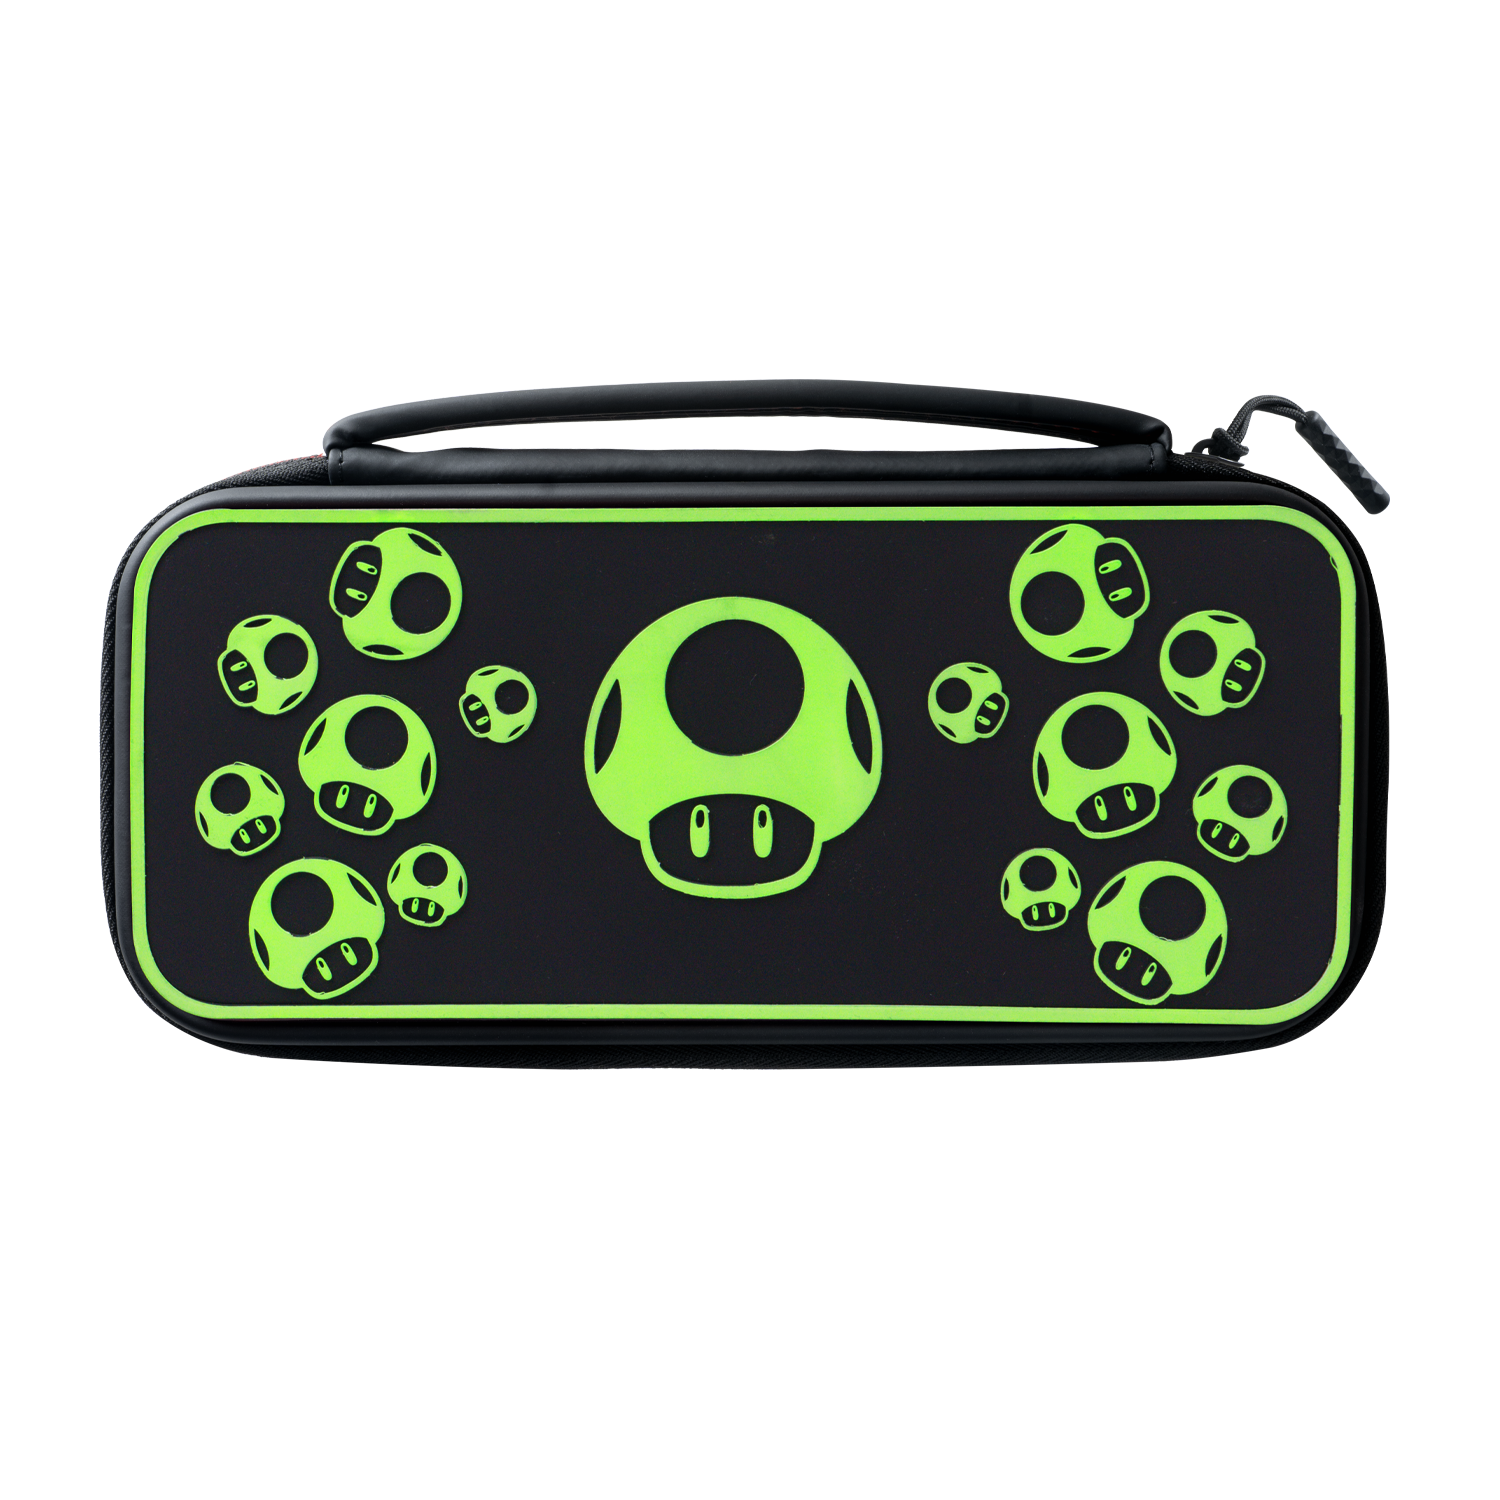 PDP 1-Up Glow in the Dark Travel Case Plus for Nintendo Switch